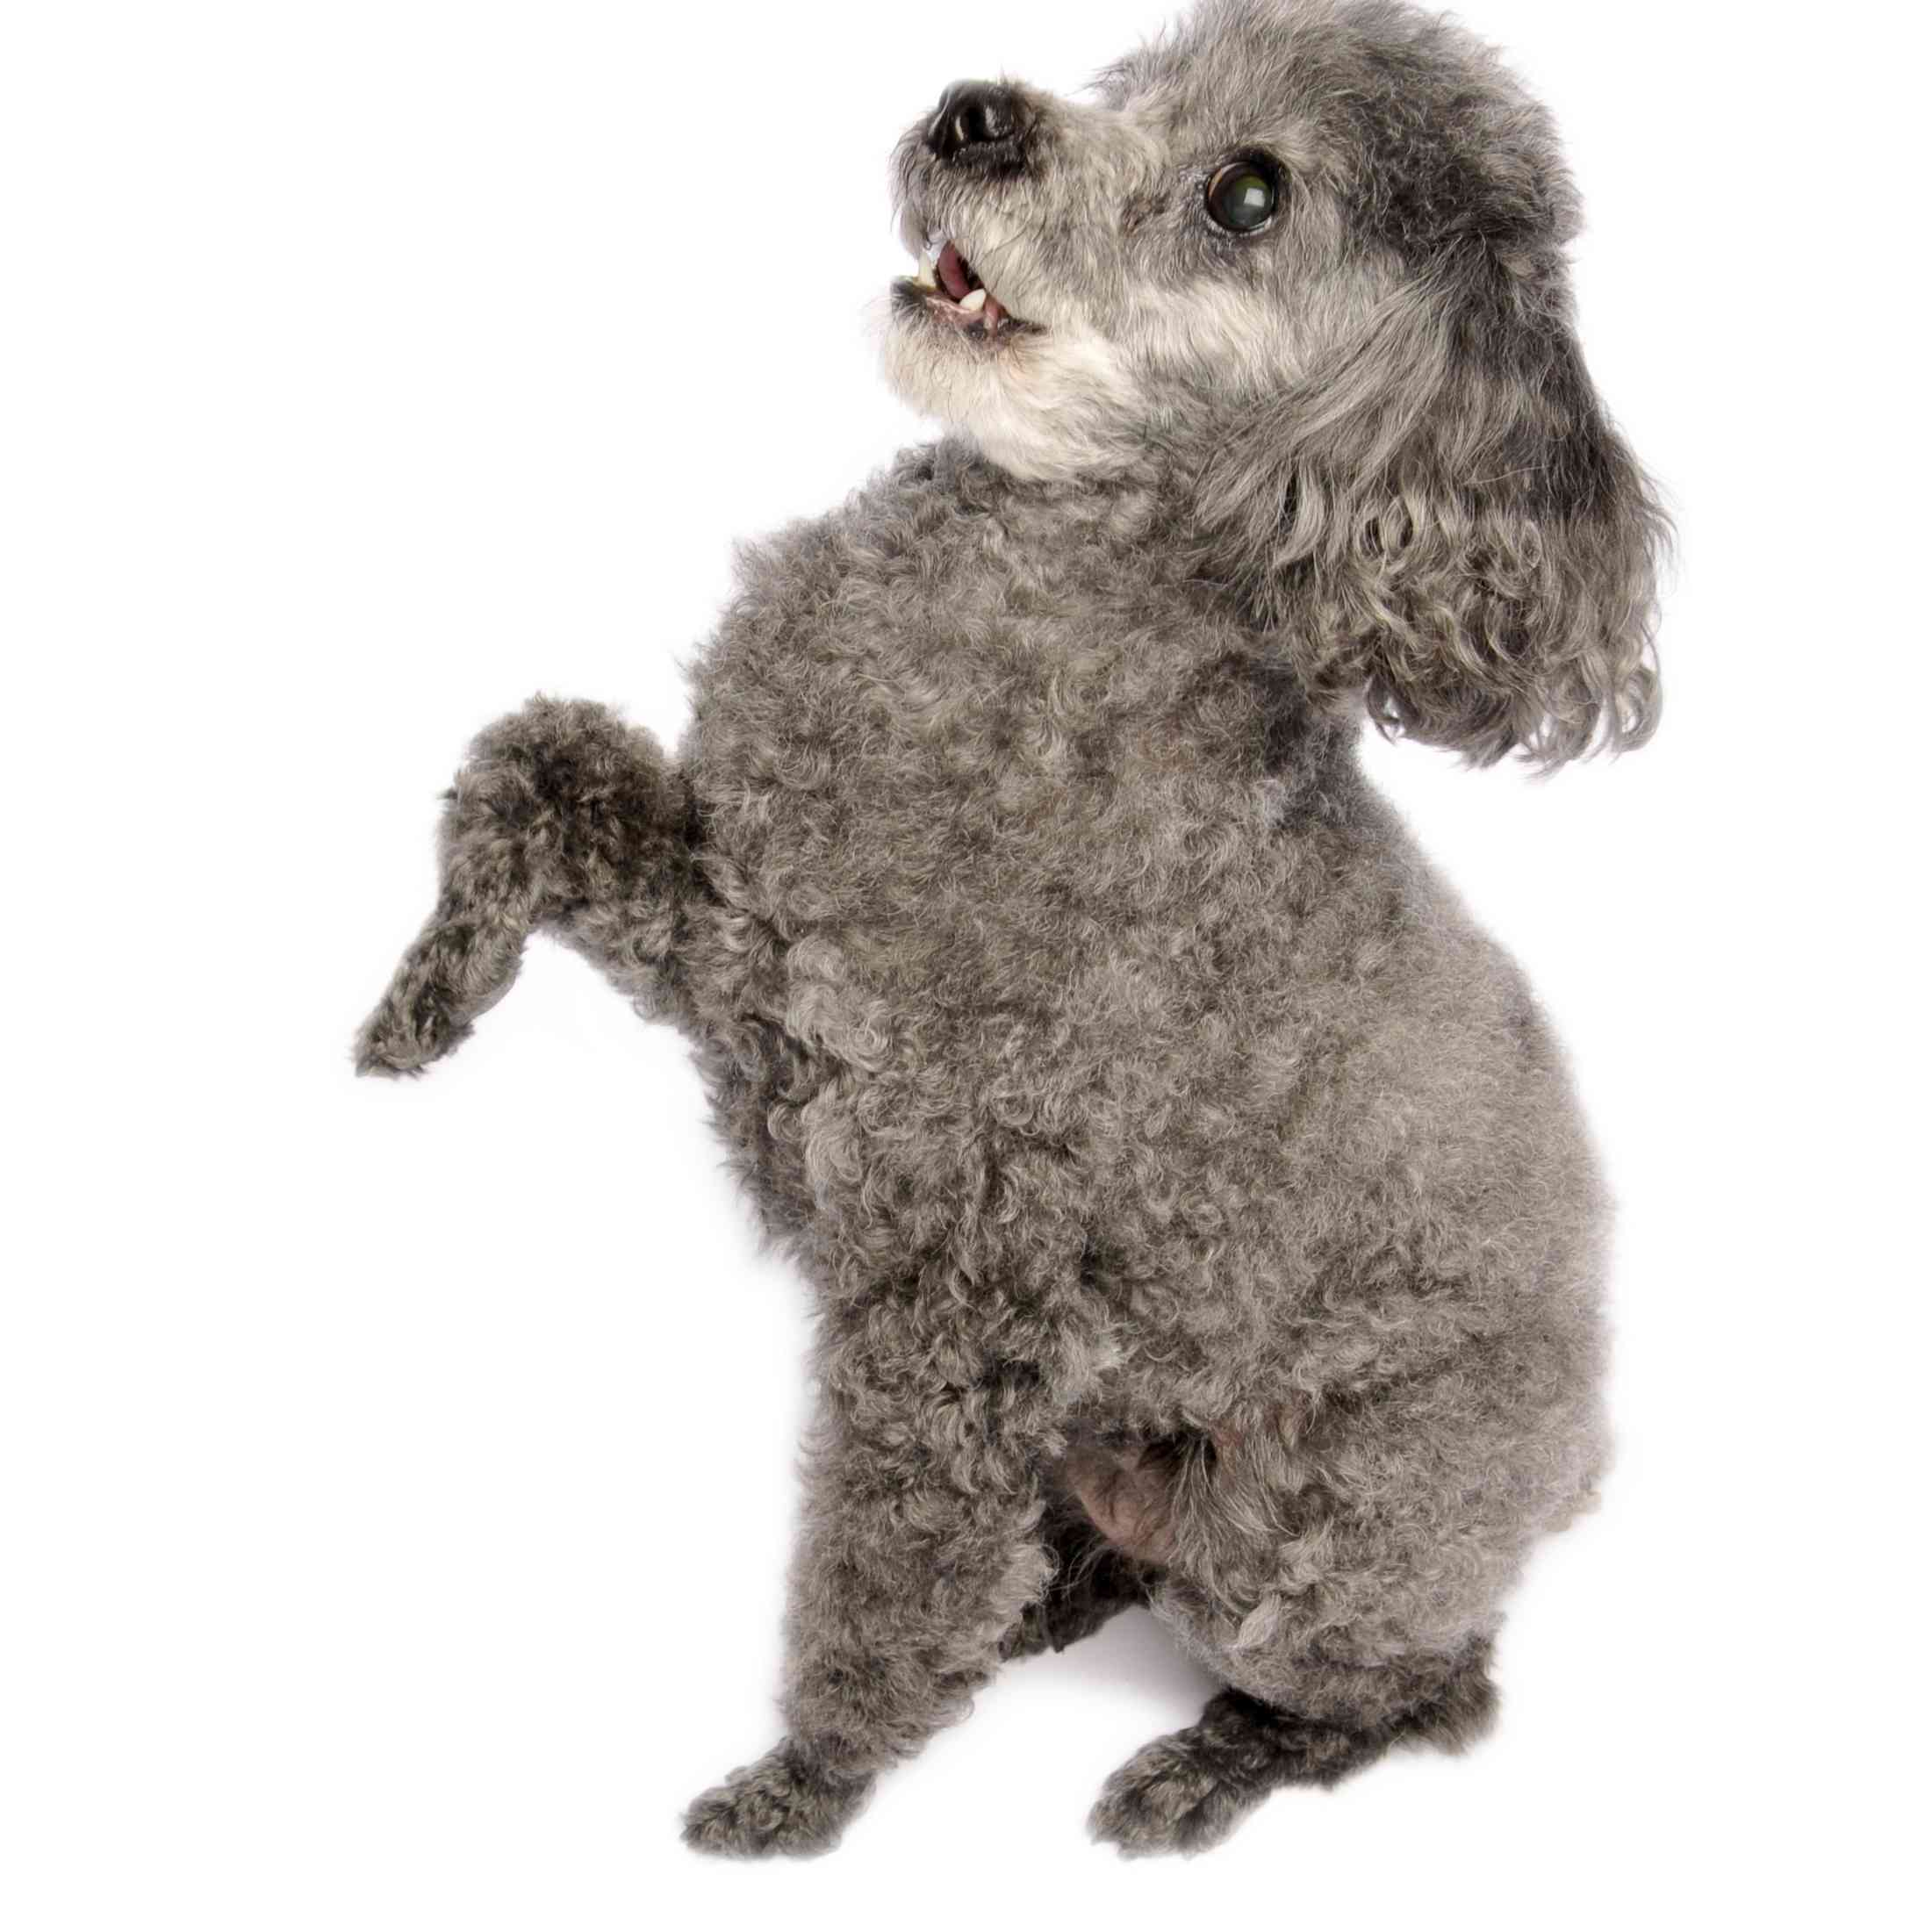 Grey Toy Poodle doing a trick.